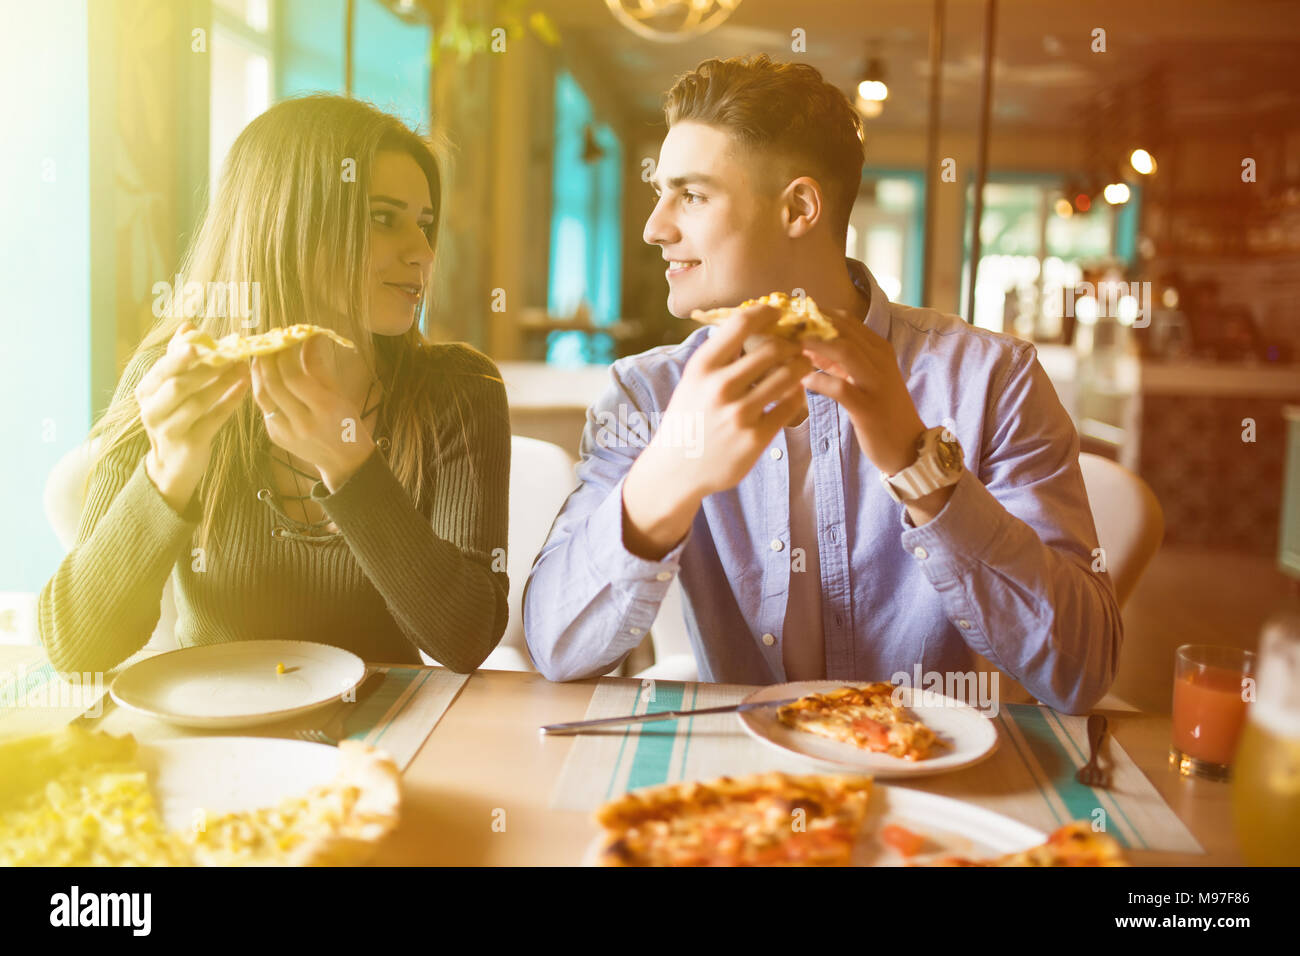 Close up photo of young couple enjoying in pizza, having fun together. Consumerism, food, lifestyle concept Stock Photo